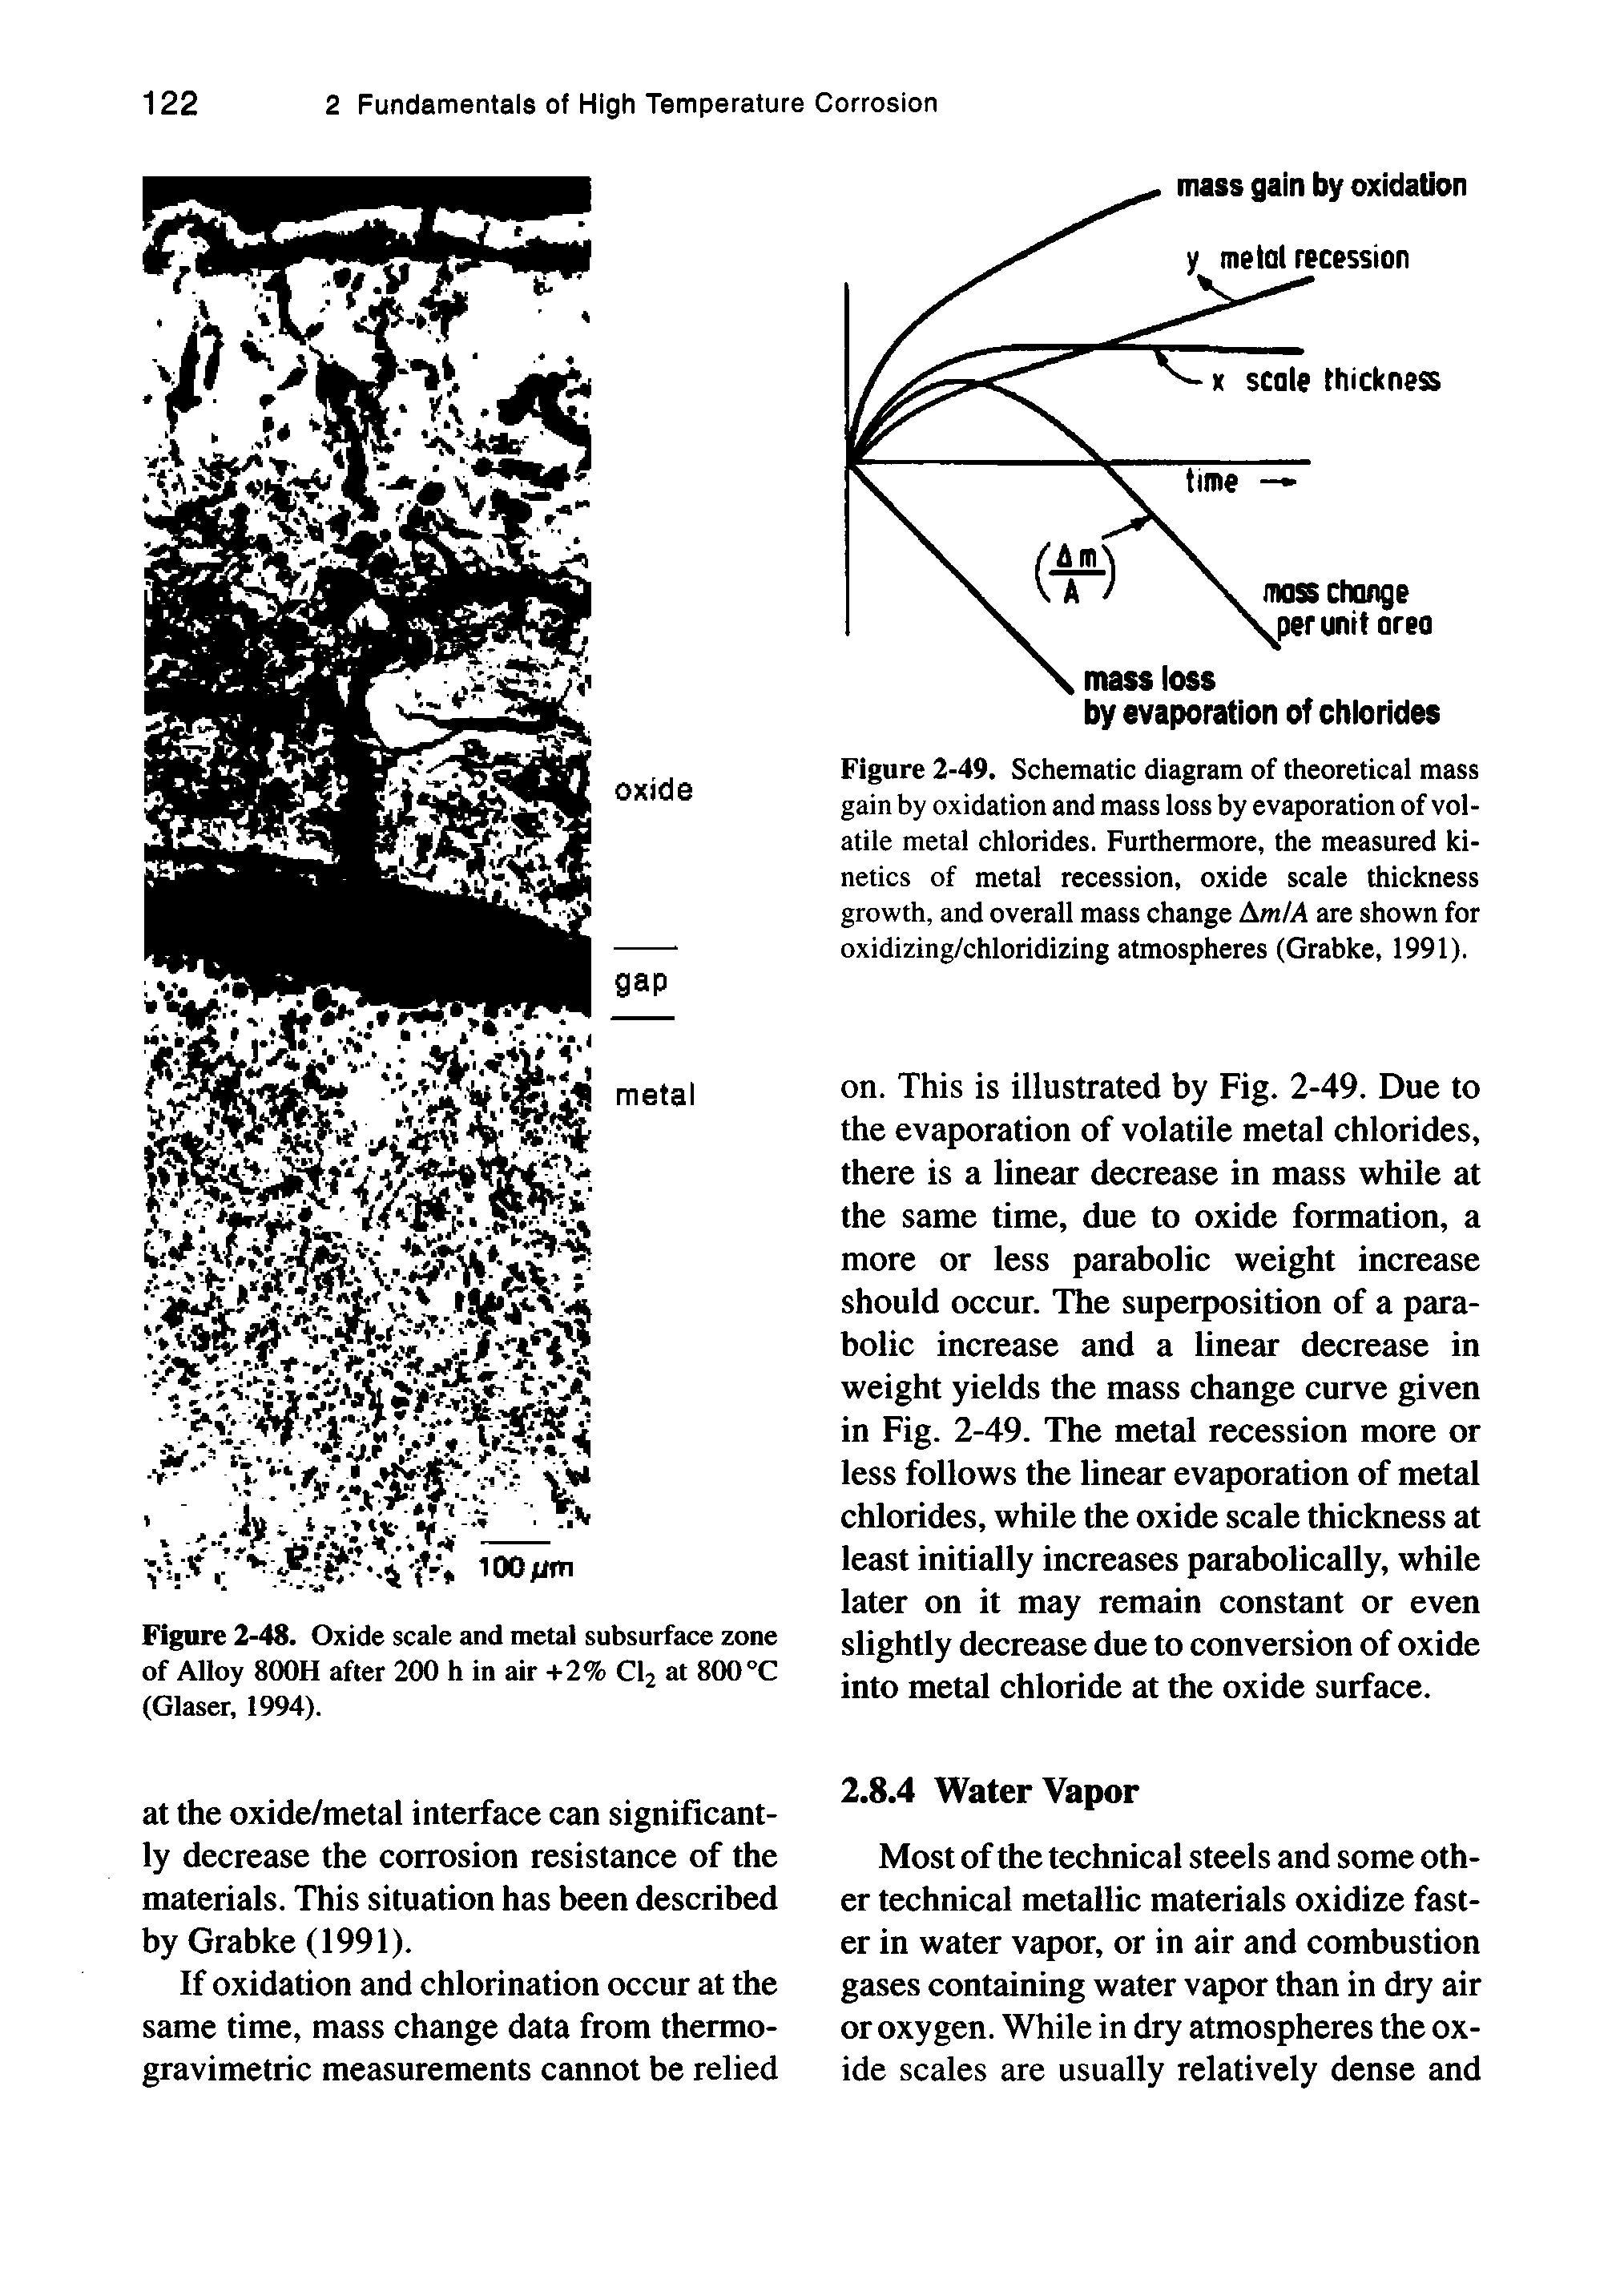 Figure 2-49. Schematic diagram of theoretical mass gain by oxidation and mass loss by evaporation of volatile metal chlorides. Furthermore, the measured kinetics of metal recession, oxide scale thickness growth, and overall mass change AmM are shown for oxidizing/chloridizing atmospheres (Grabke, 1991).